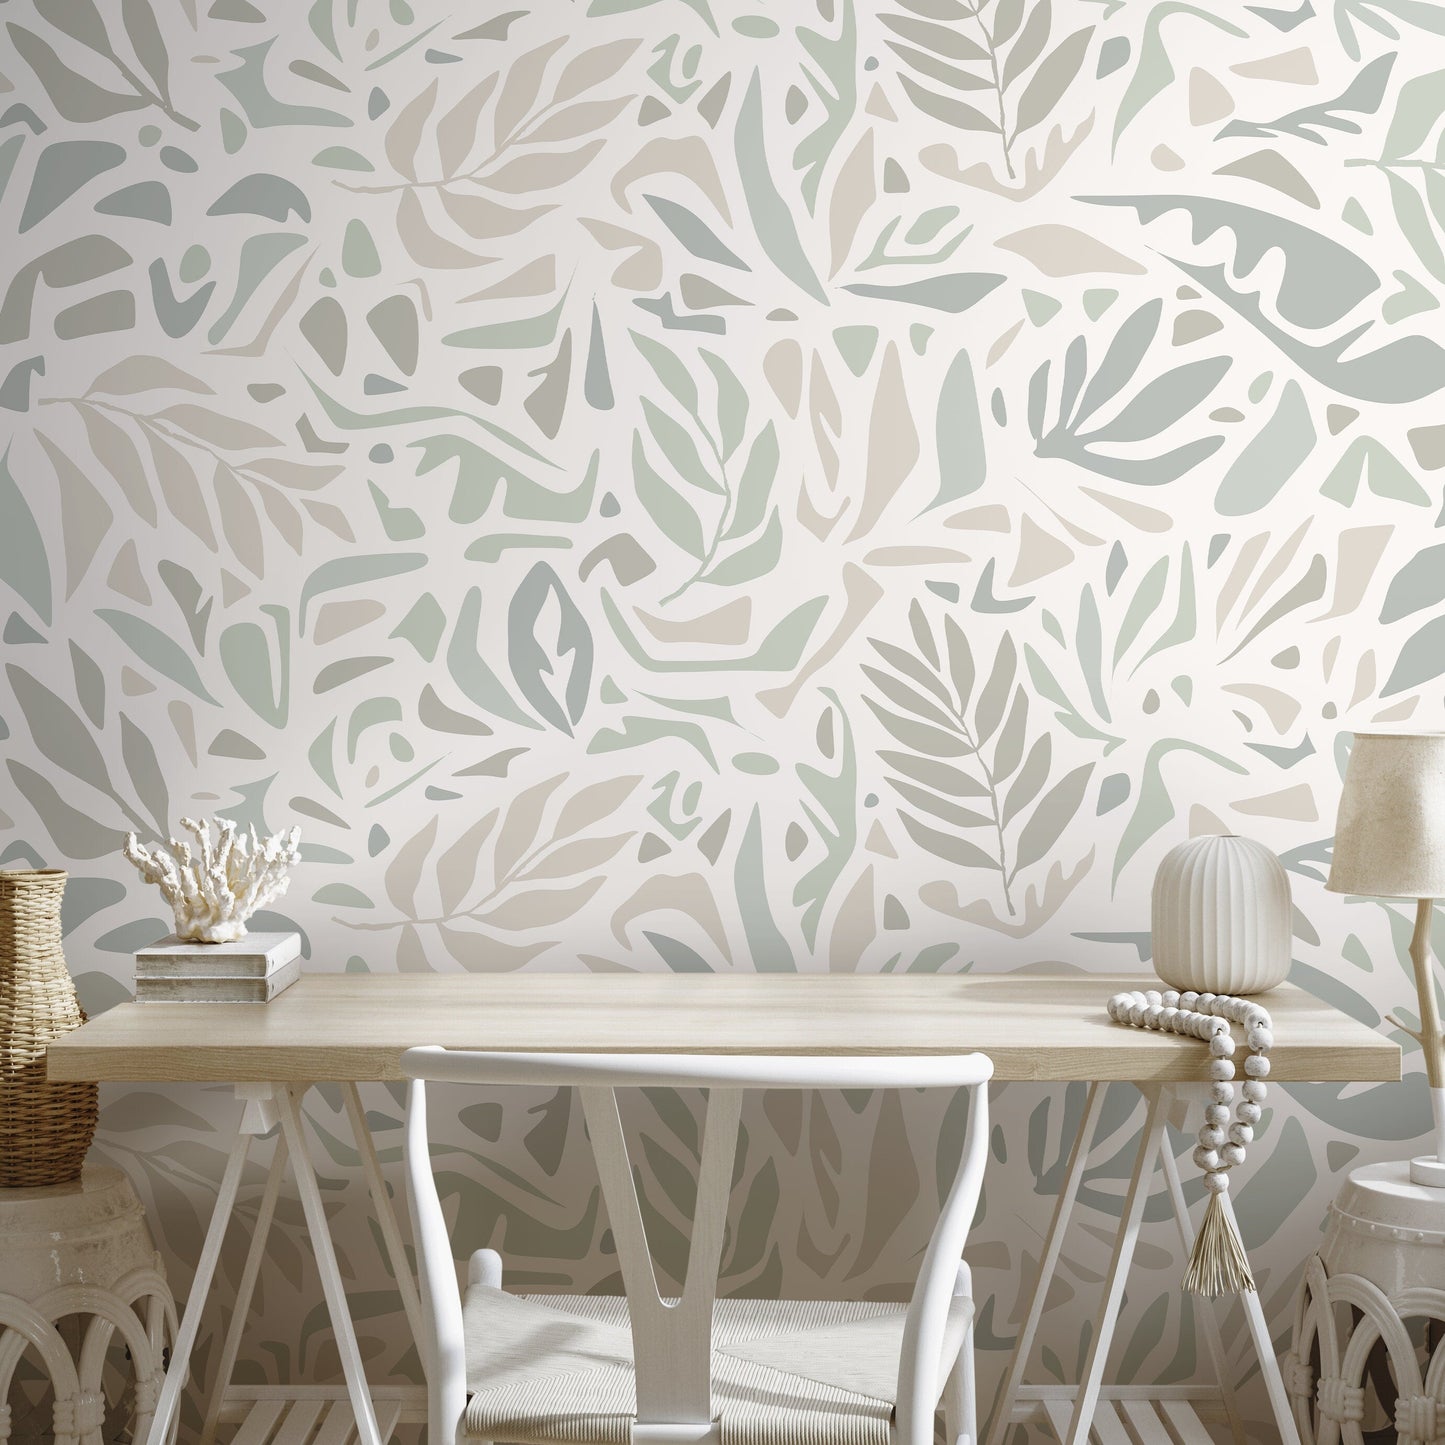 Neutral Leaf Wallpaper Abstract Wallpaper Peel and Stick and Traditional Wallpaper - D724